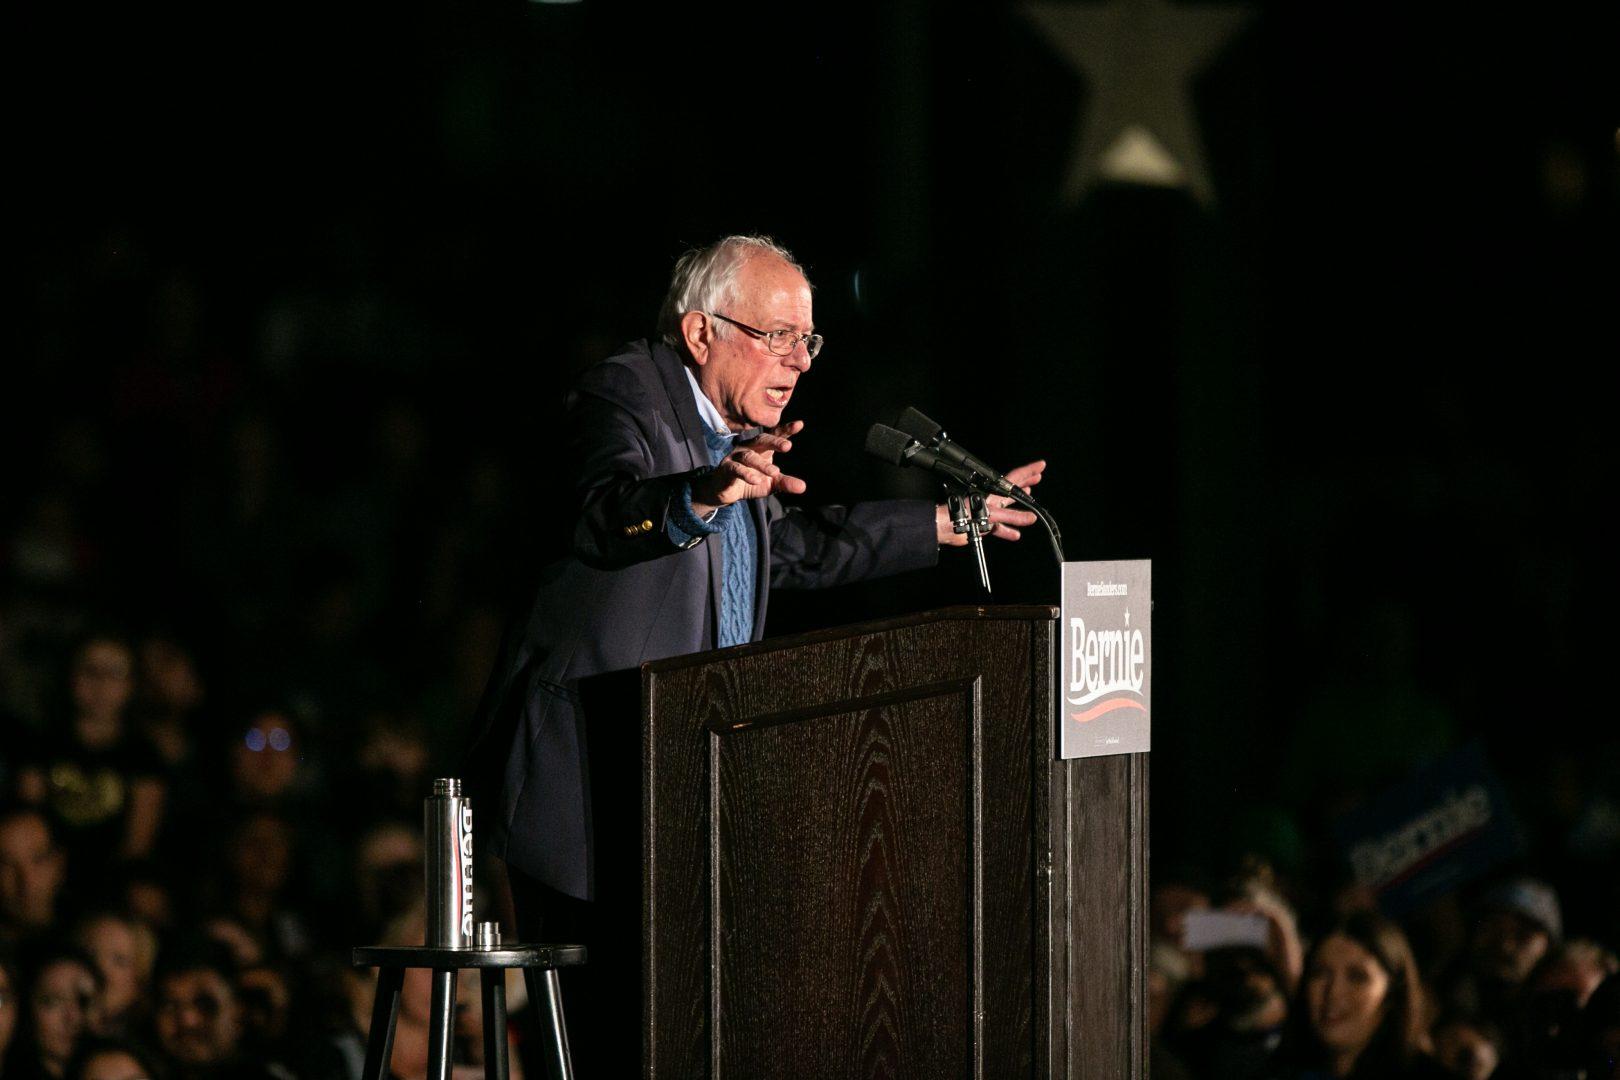 Presidential hopeful Bernie Sanders speaks in front of a crowd at the Veterans Peace Memorial Lawn at Fresno City College on Friday, November 15, 2019. (Larry Valenzuela/The Collegian)